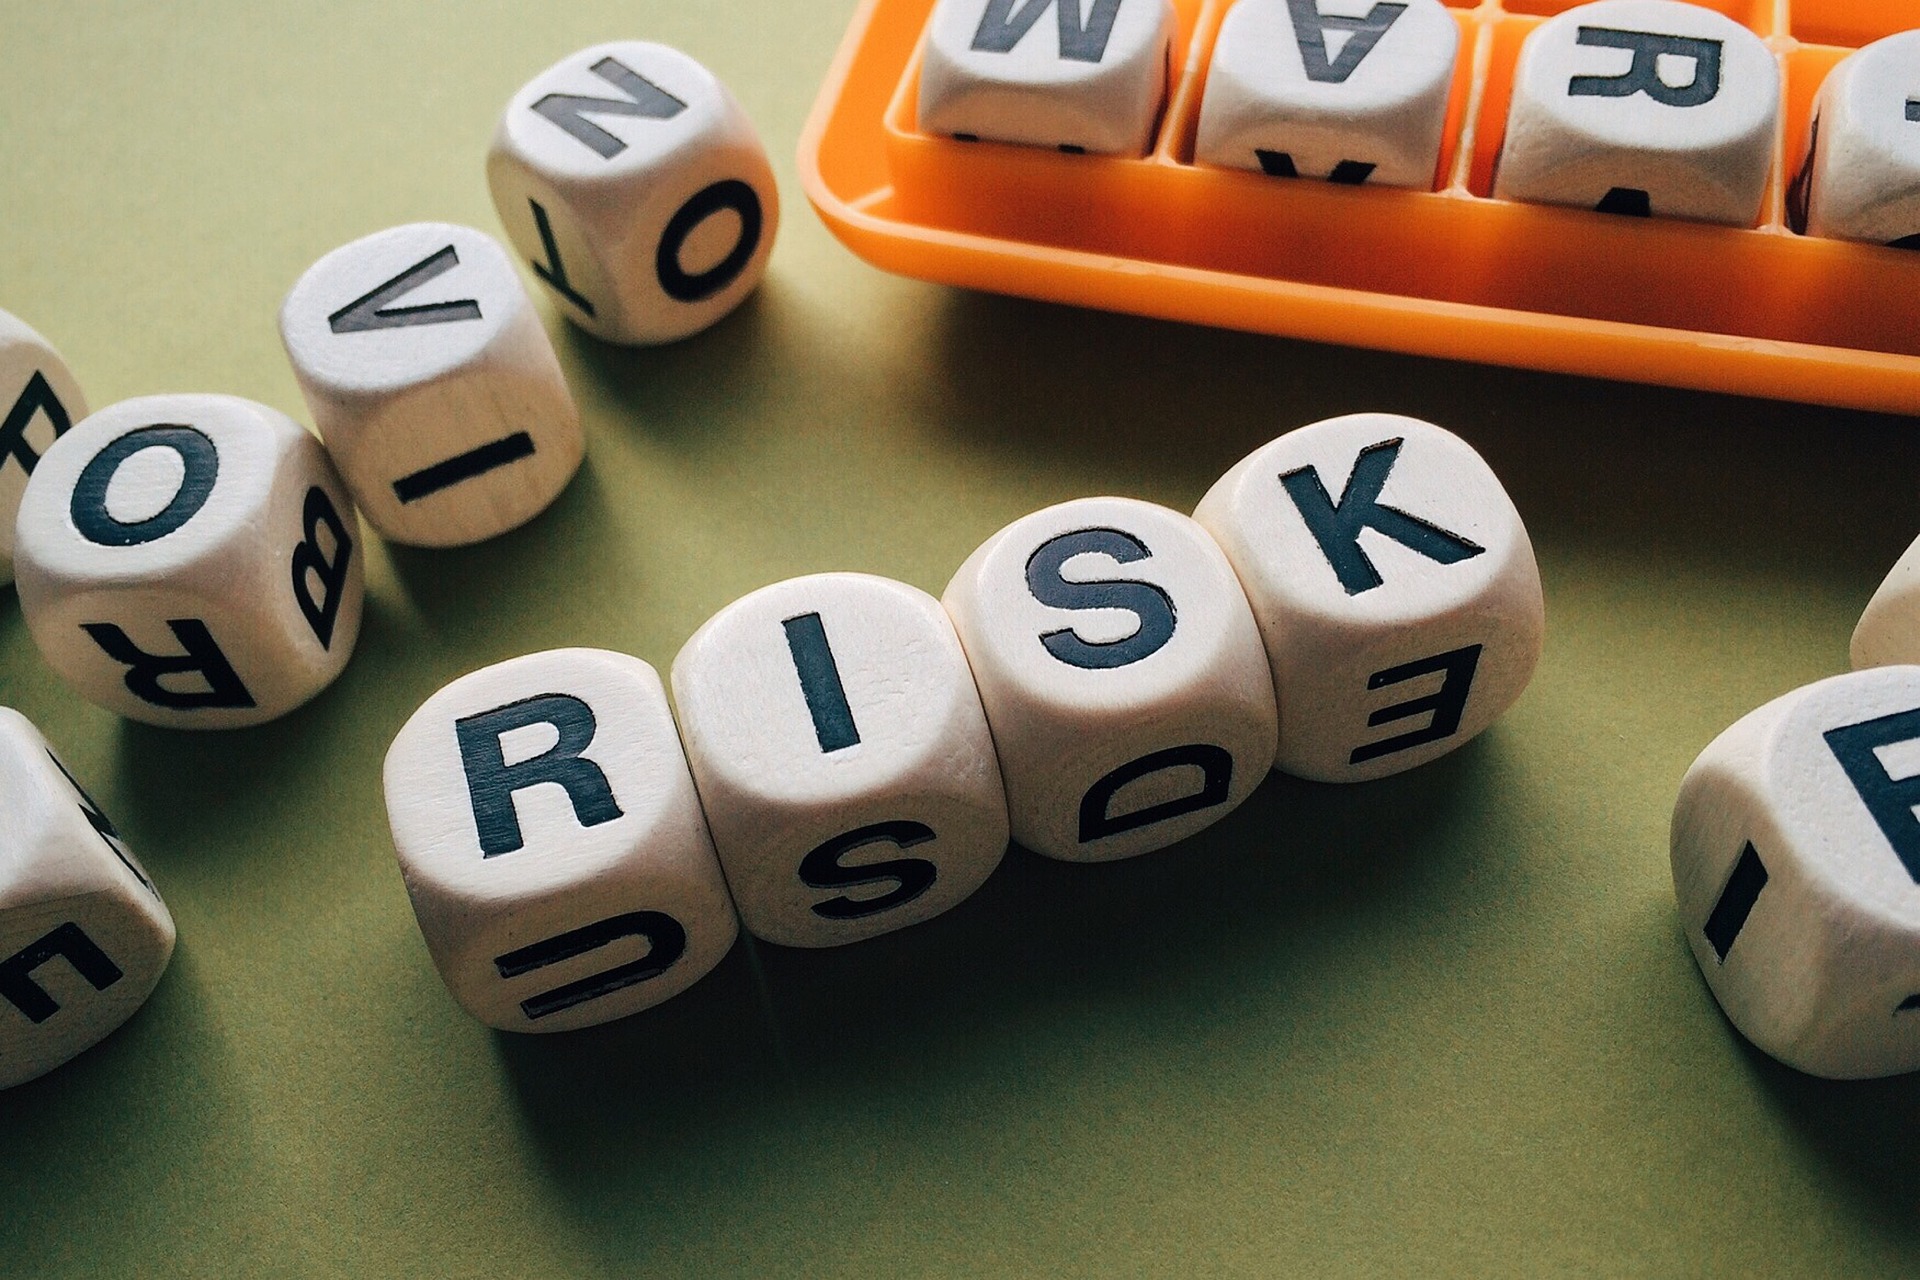 Ask questions... Reduce risk